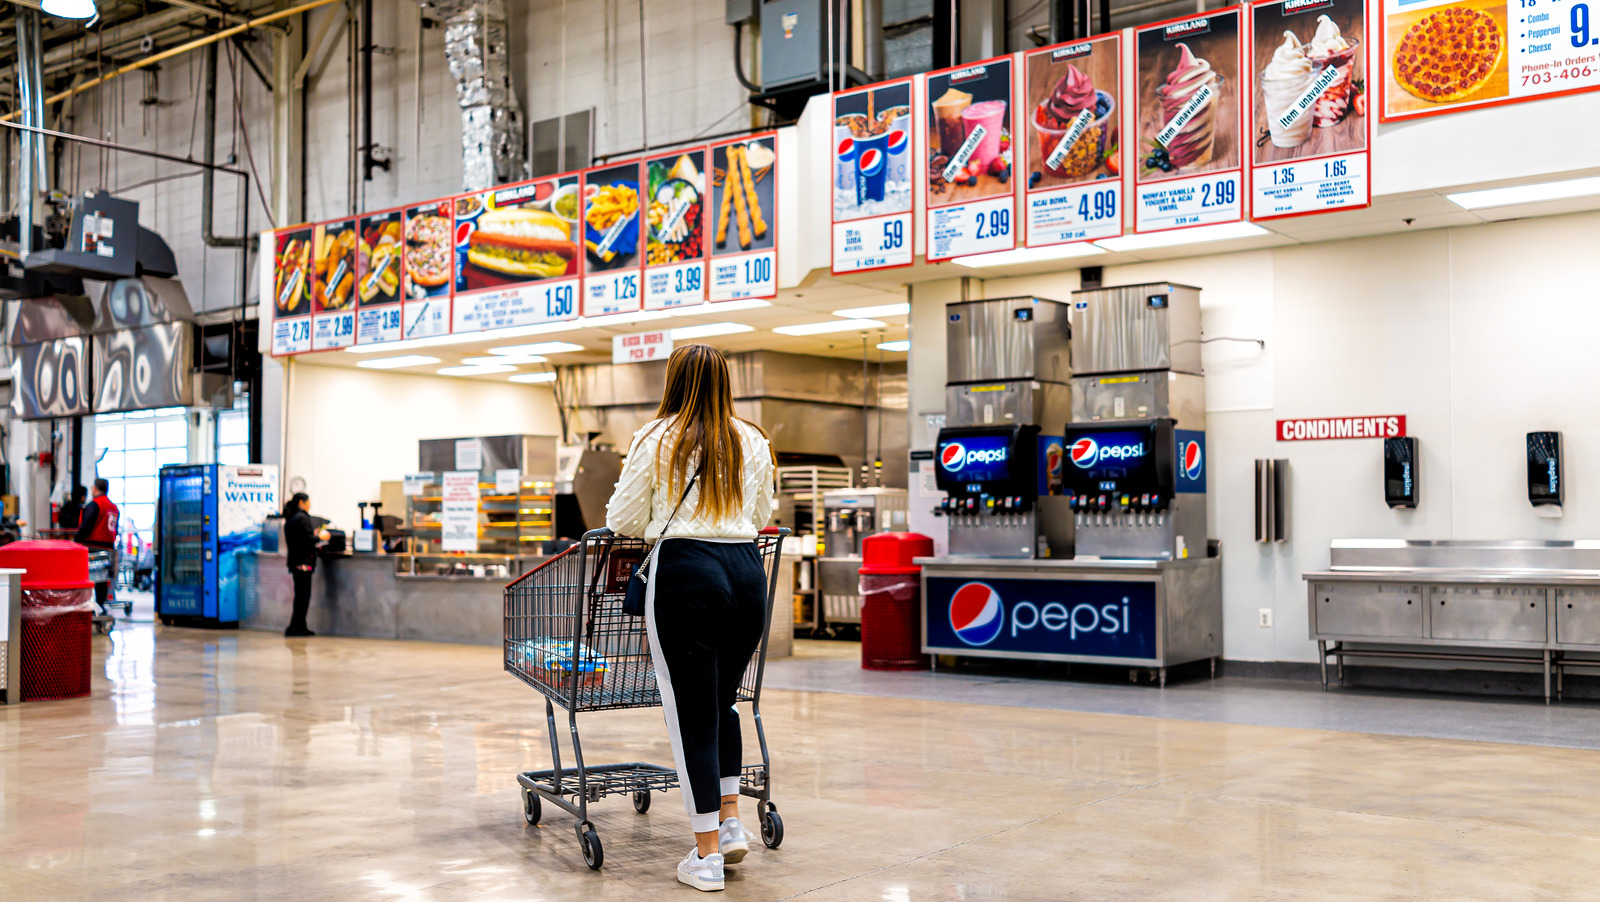 Reddit Sides With An Angry Costco Customer In Food Court Showdown